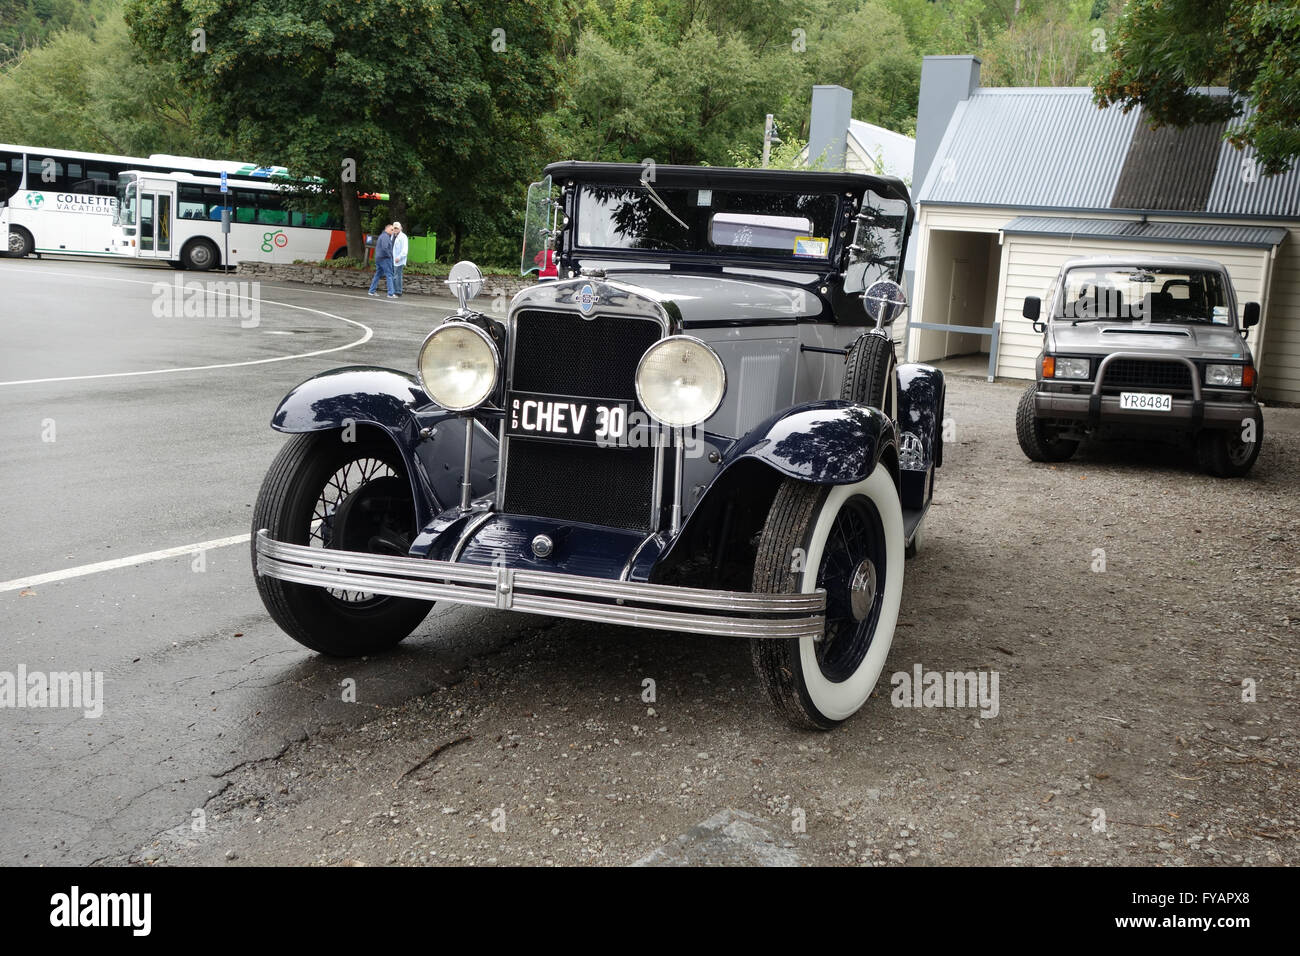 1930 Chevrolet Universal Vintage car seen in Arrowtown, South Island, New Zealand Stock Photo